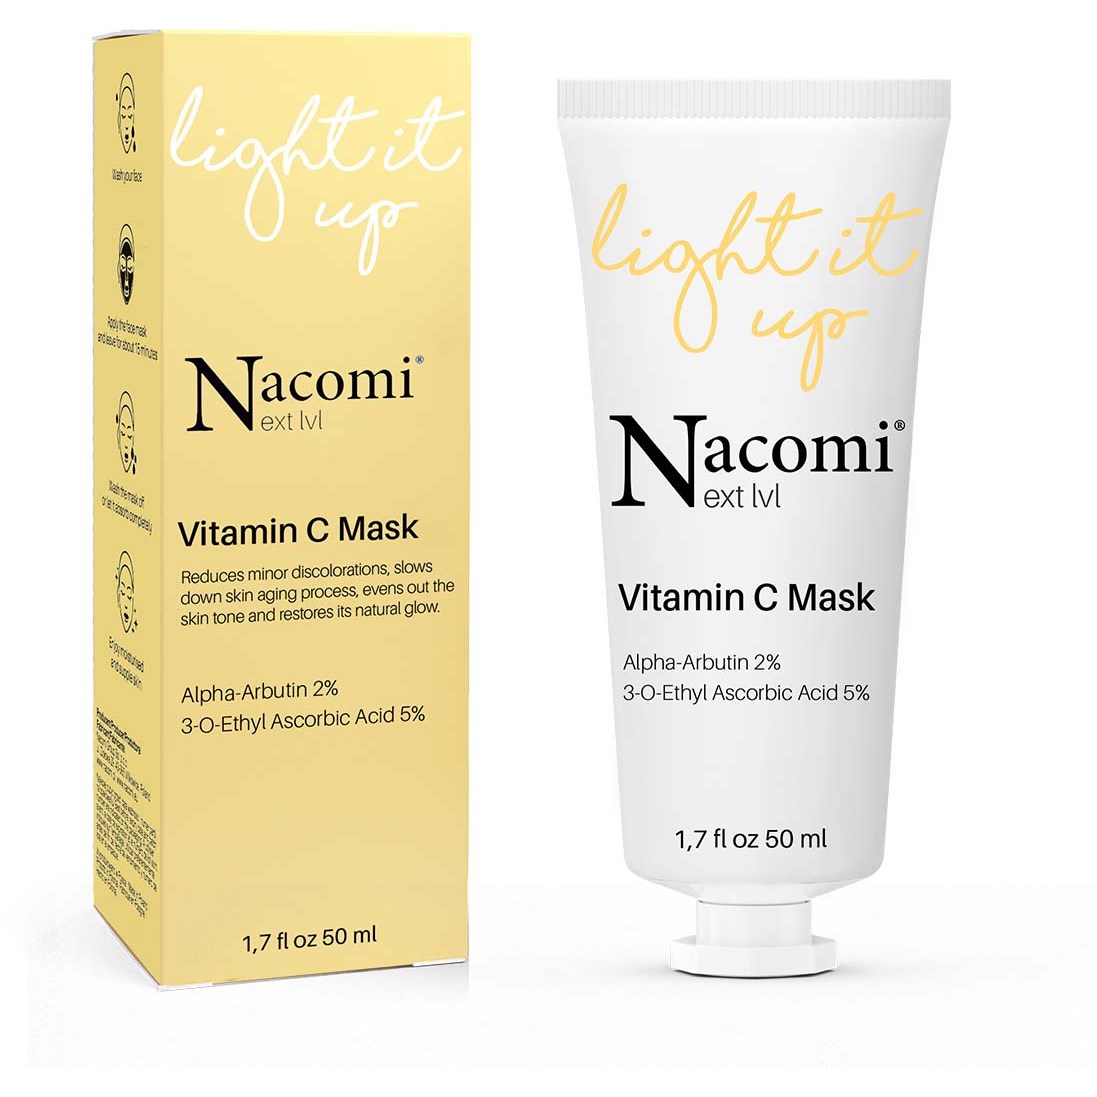 Nacomi Light it up - Brightening face mask with vitamin C 50 ml